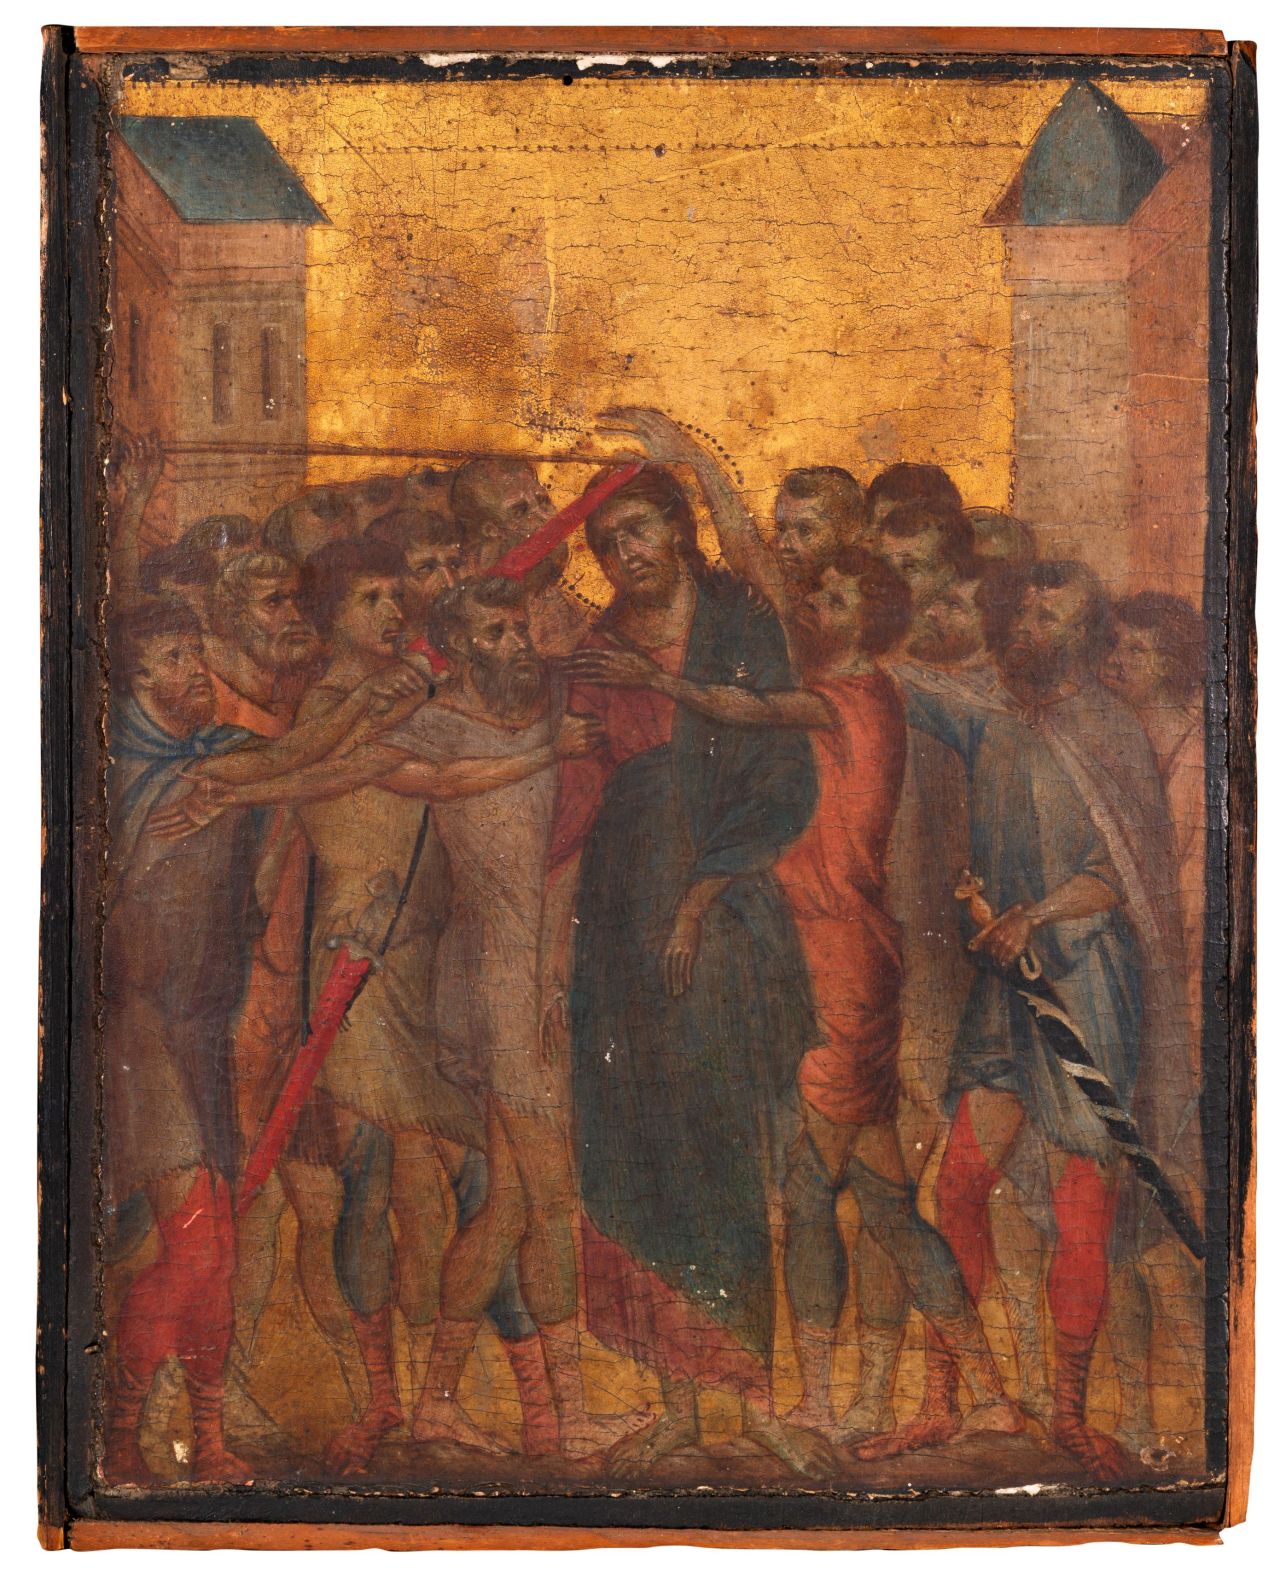 The artwork is believed to be part of a triptych made in 1280.